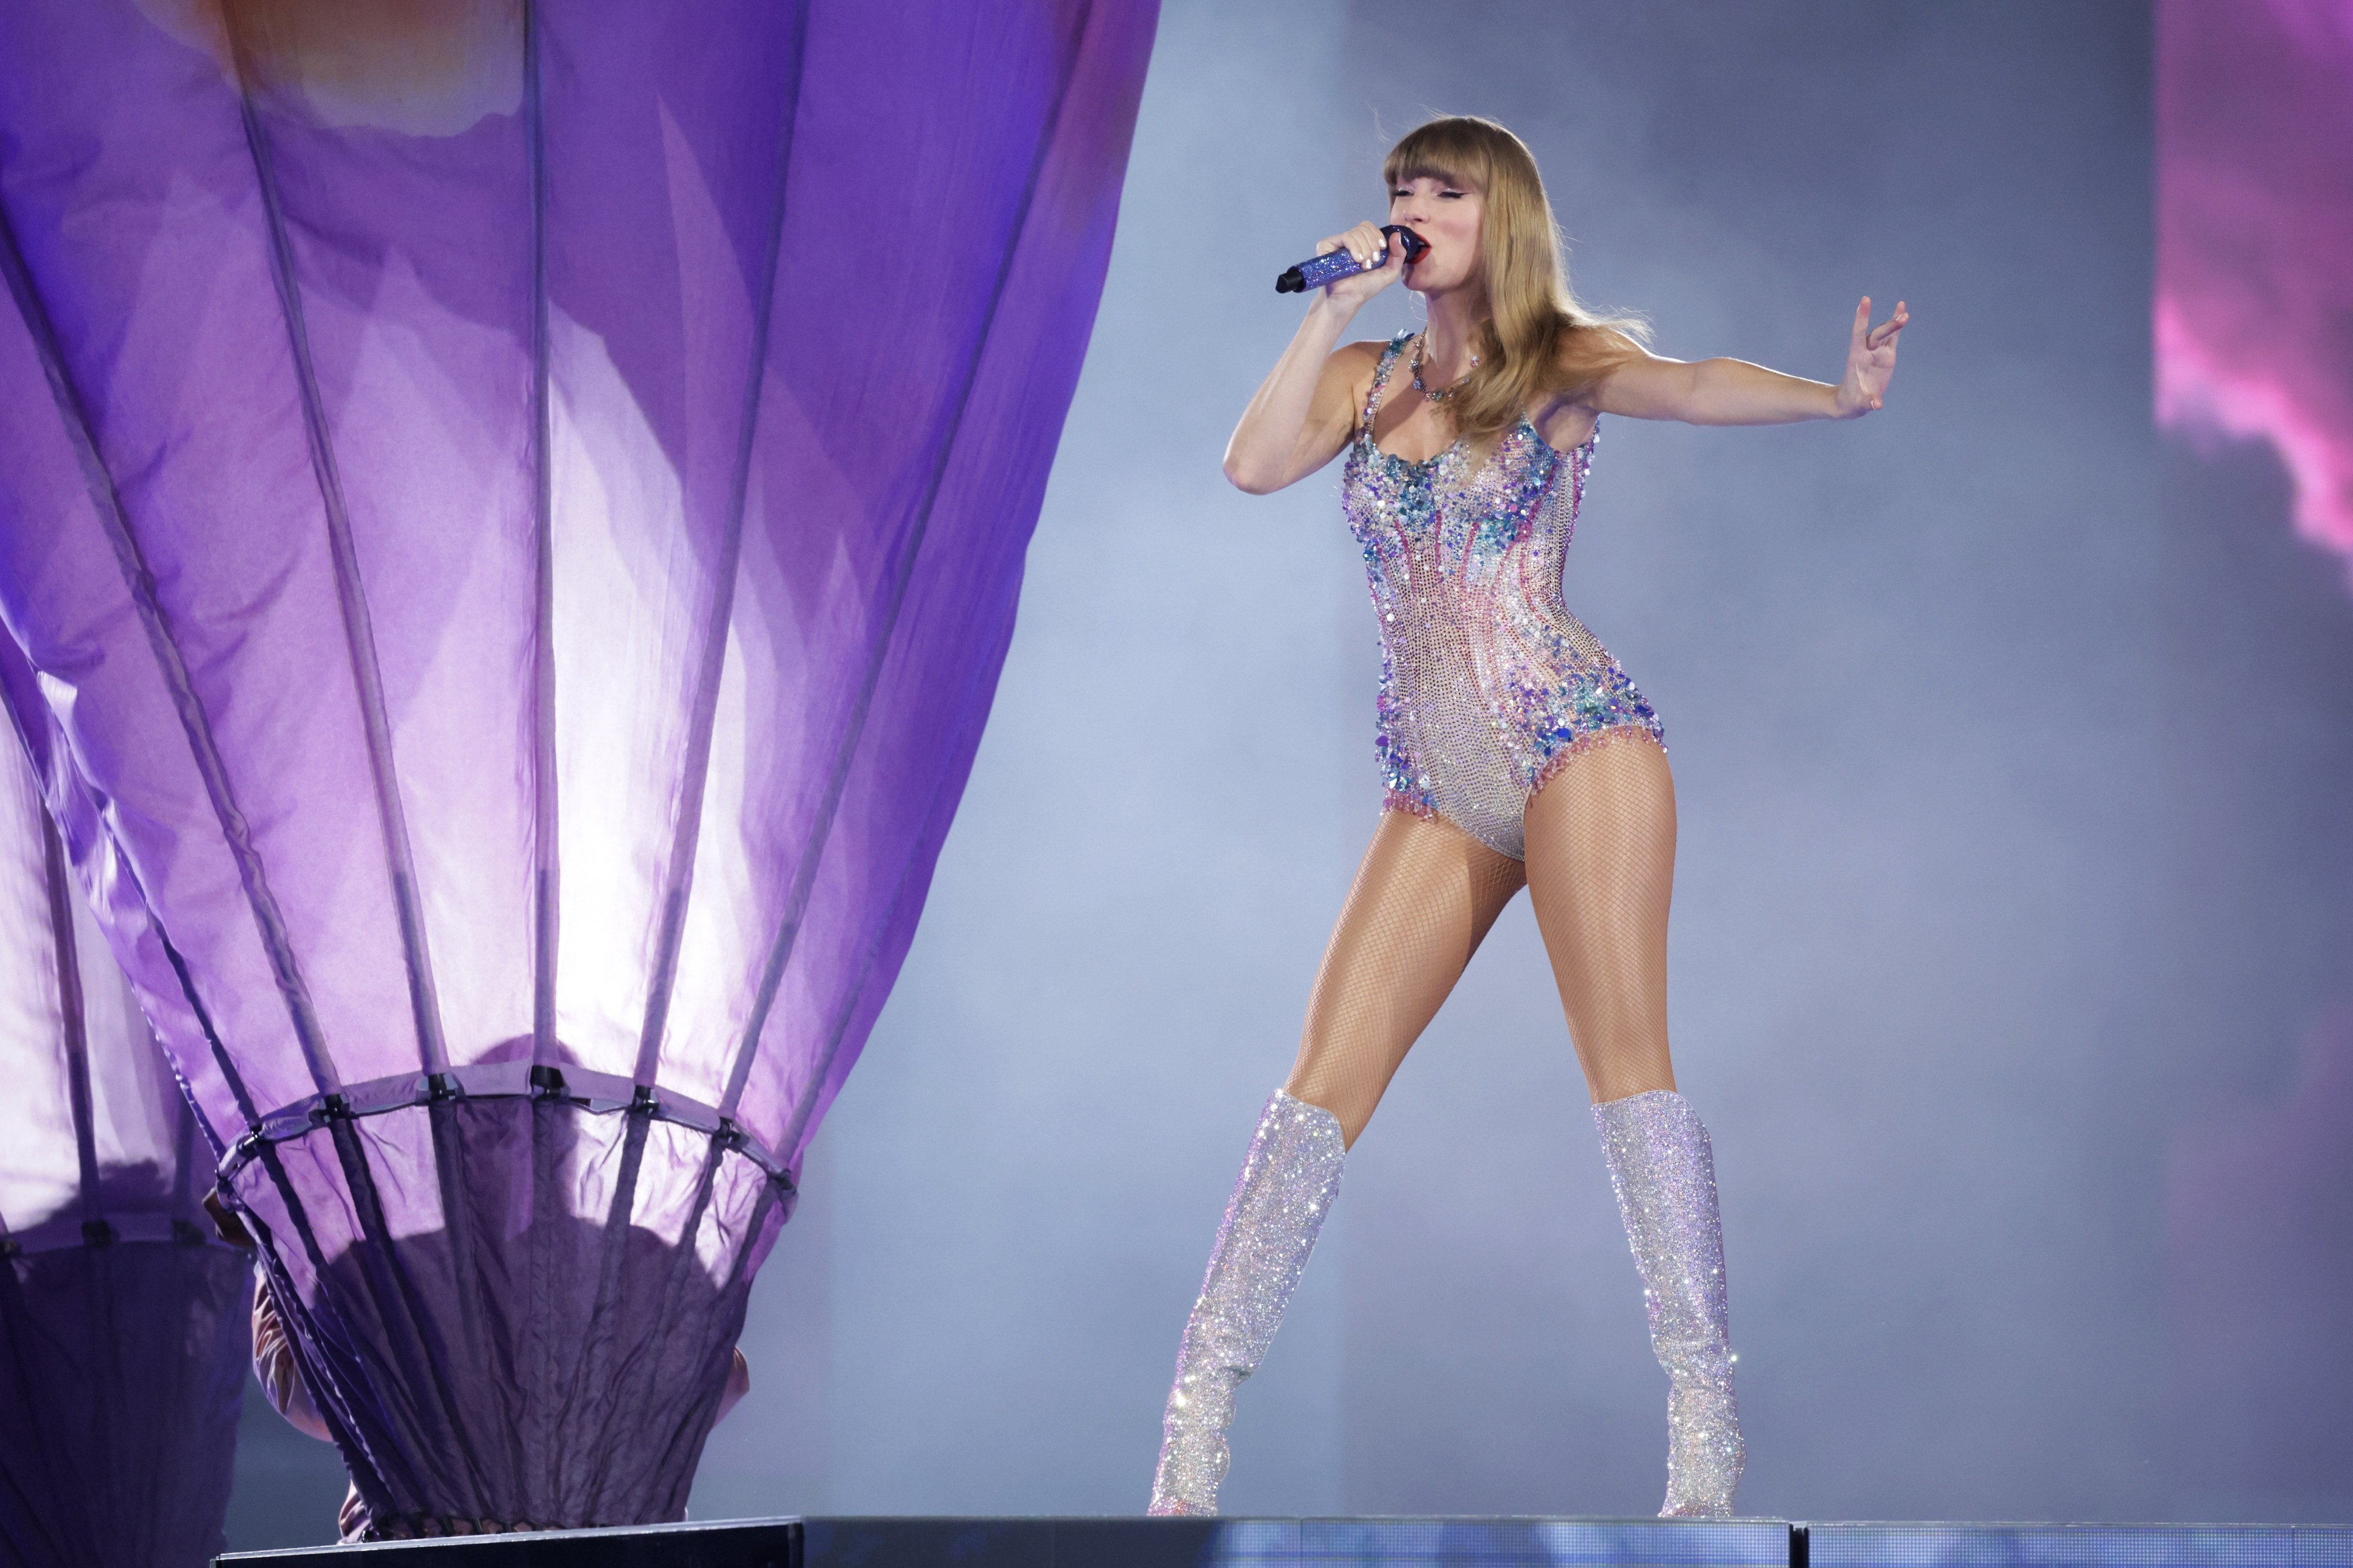 Taylor Swift performs at the National Stadium in Singapore on March 02. Photo: Getty Images for TAS Rights Management